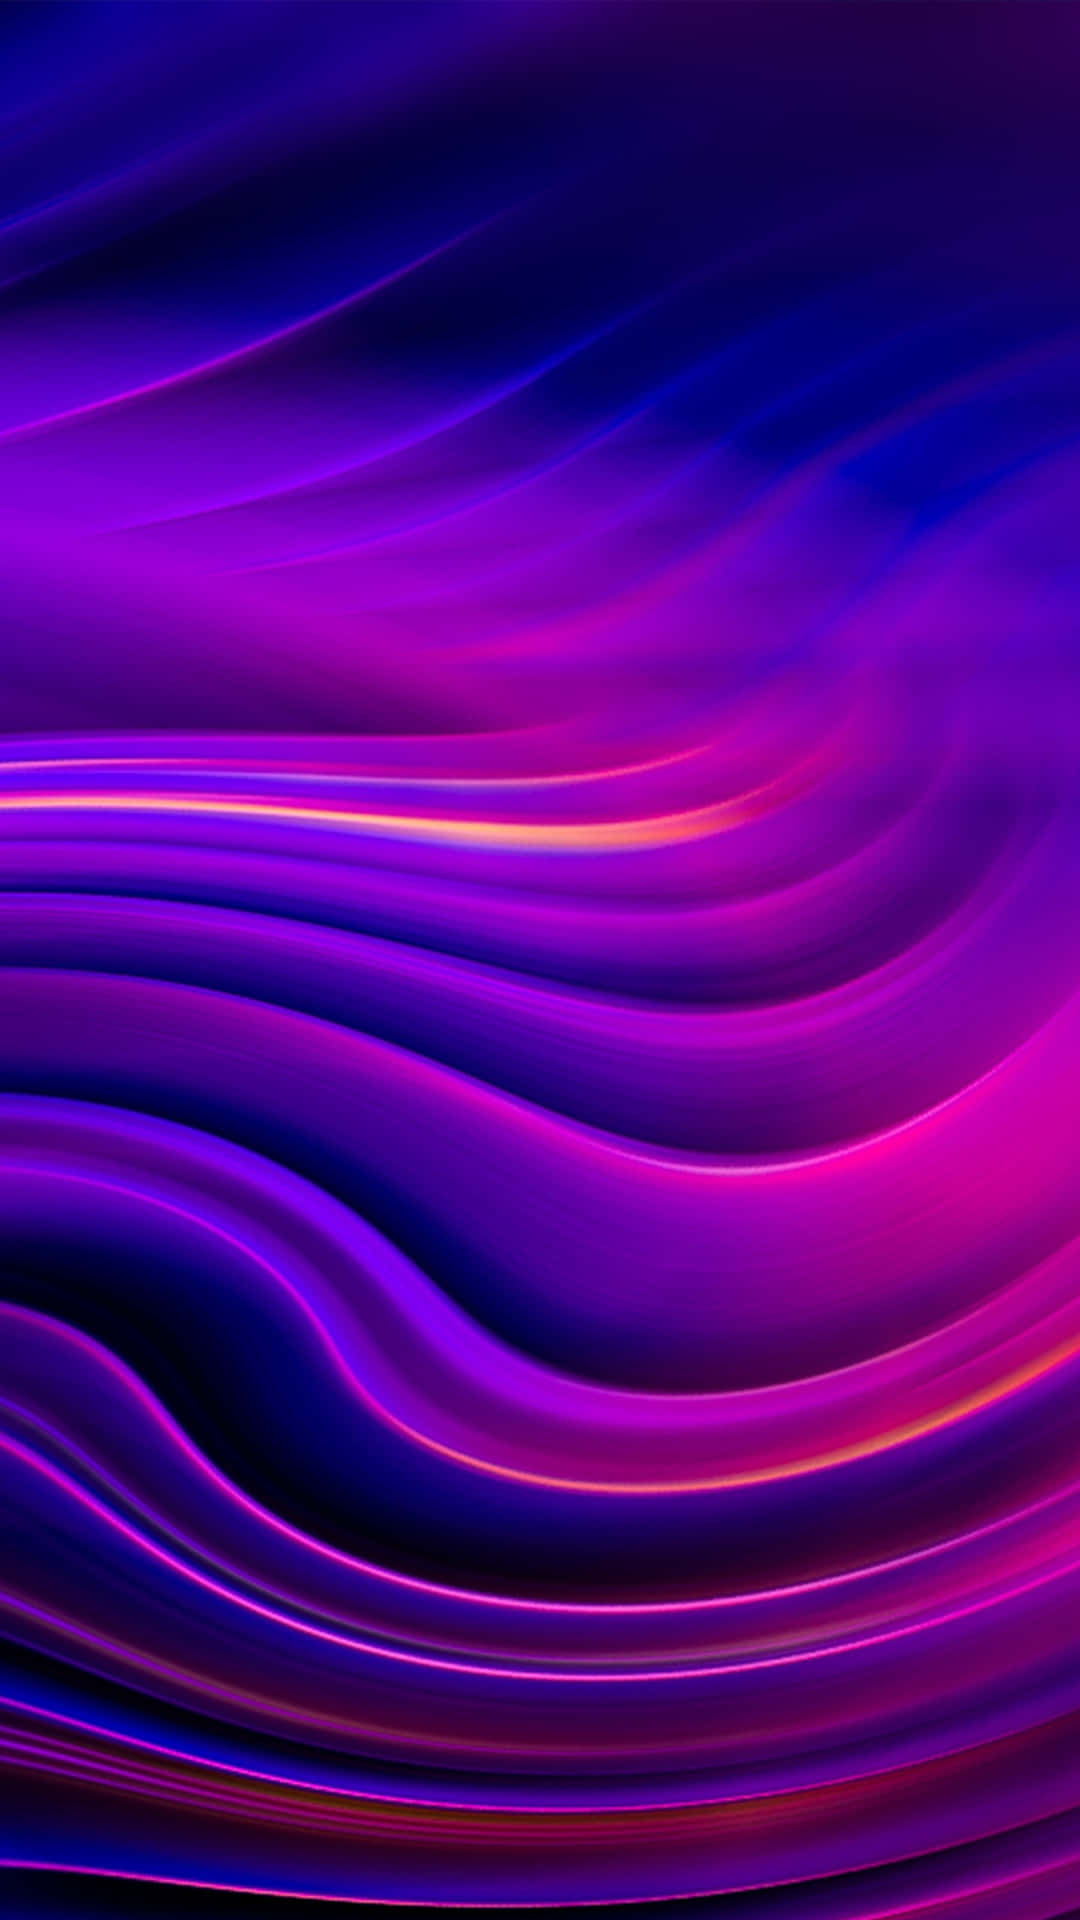 Abstract and Elegant Pink Swirl Background